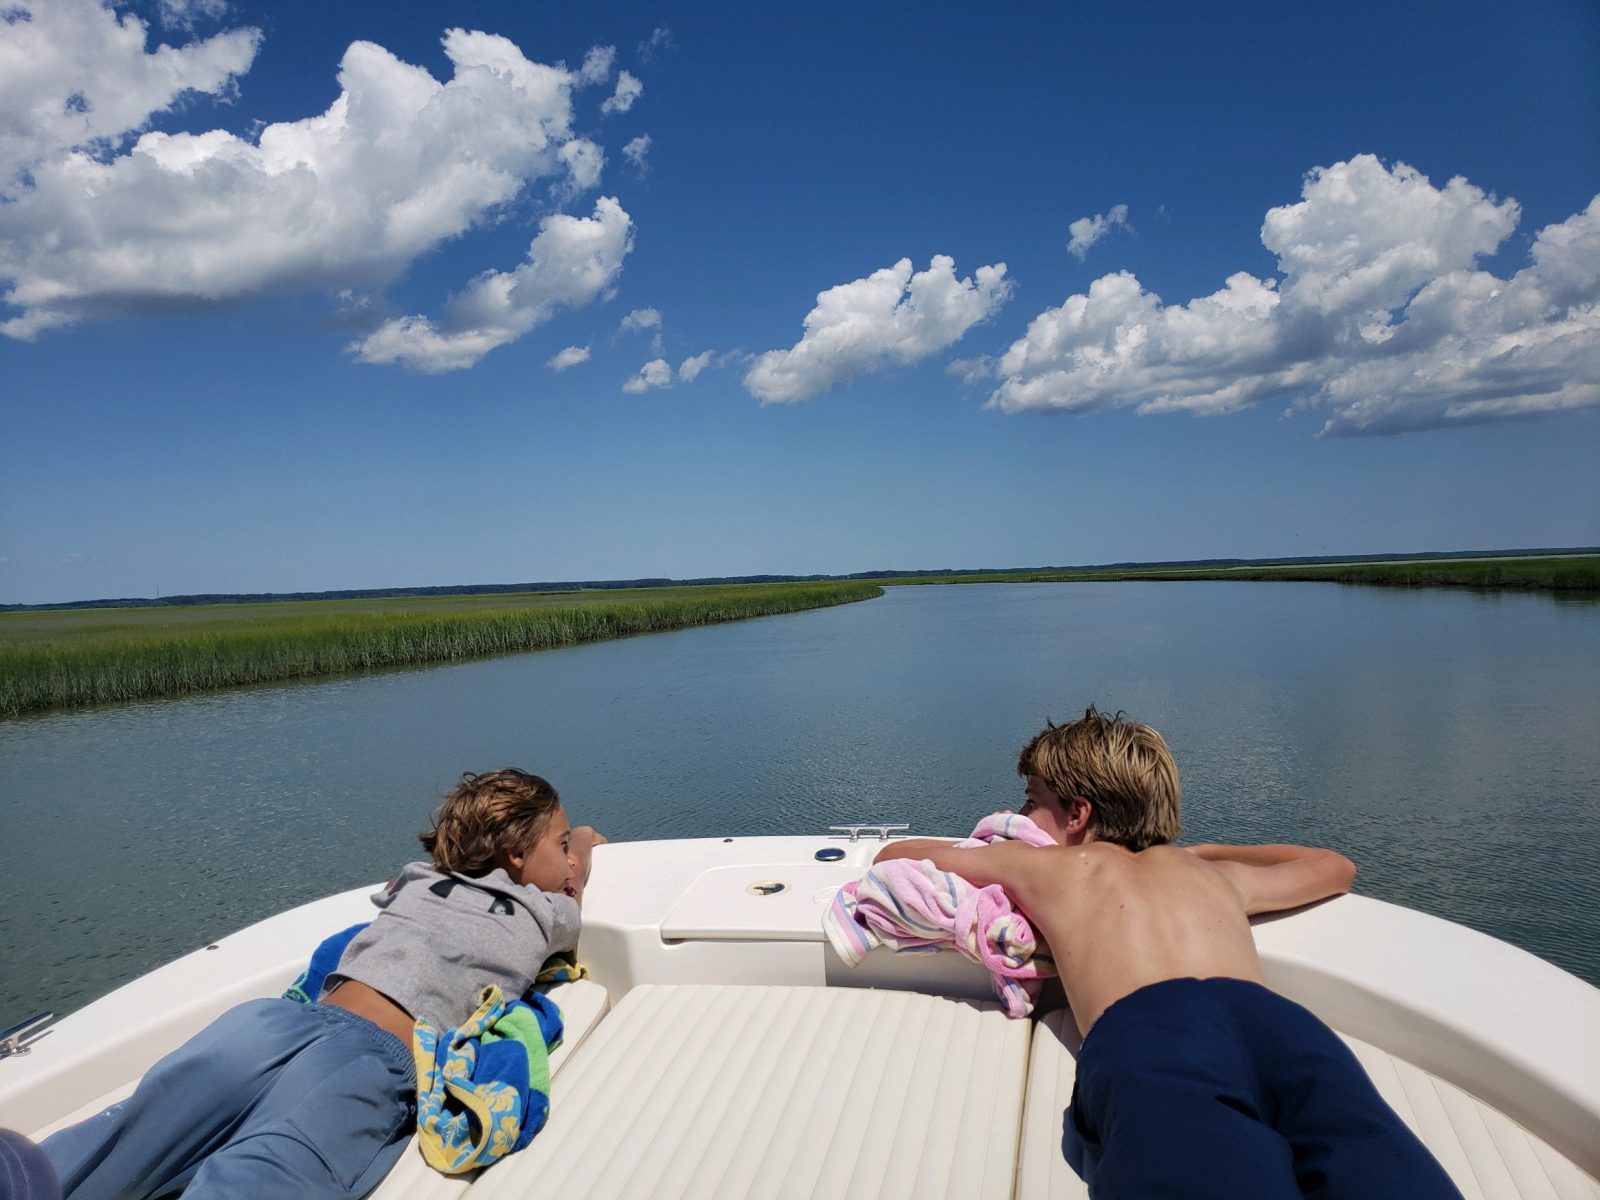 Enjoy the natural beauty of the Eastern Shore and the charming small town of Cape Charles.